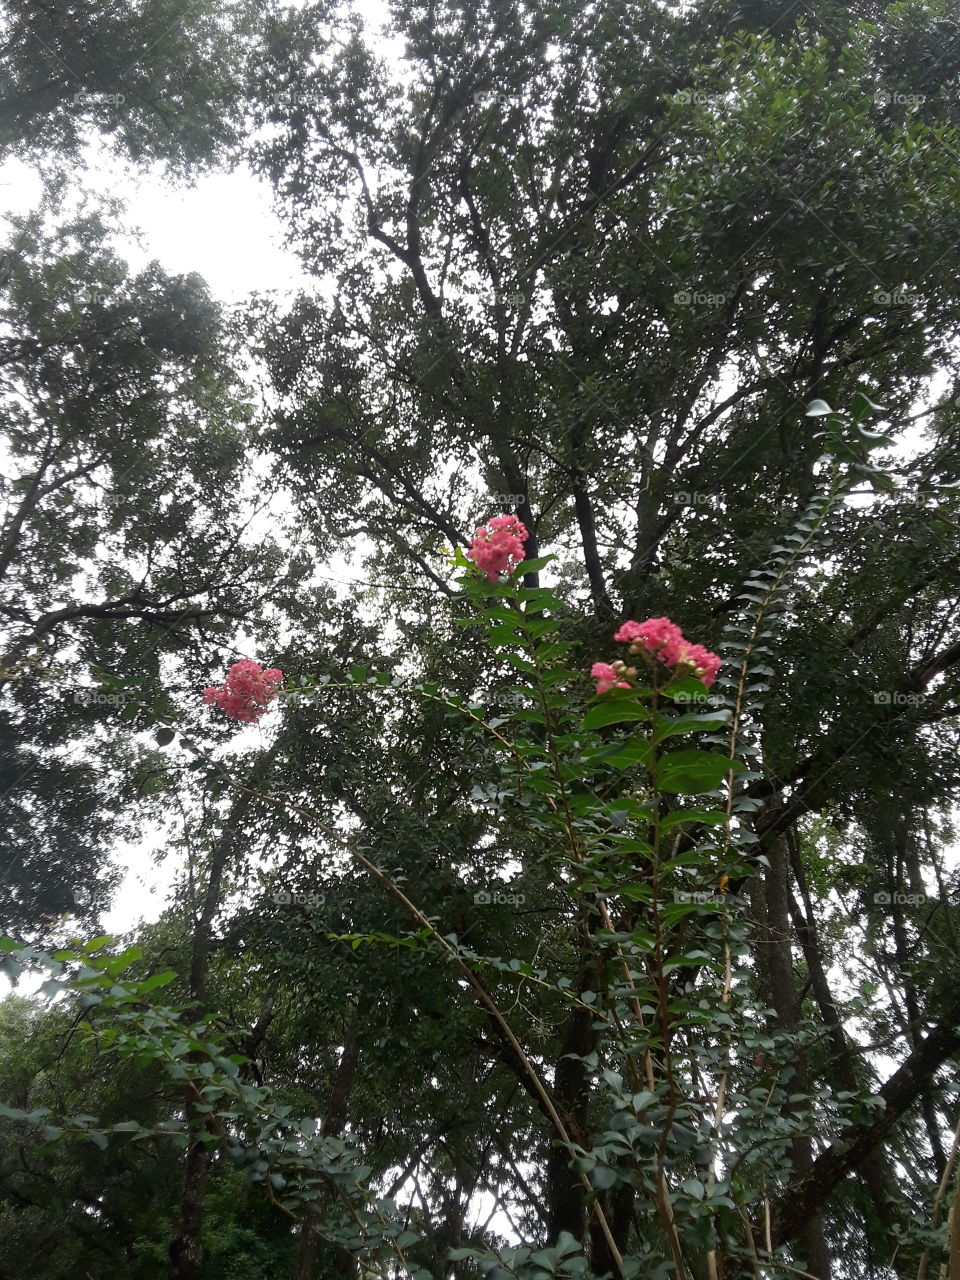 Flowers in the Trees